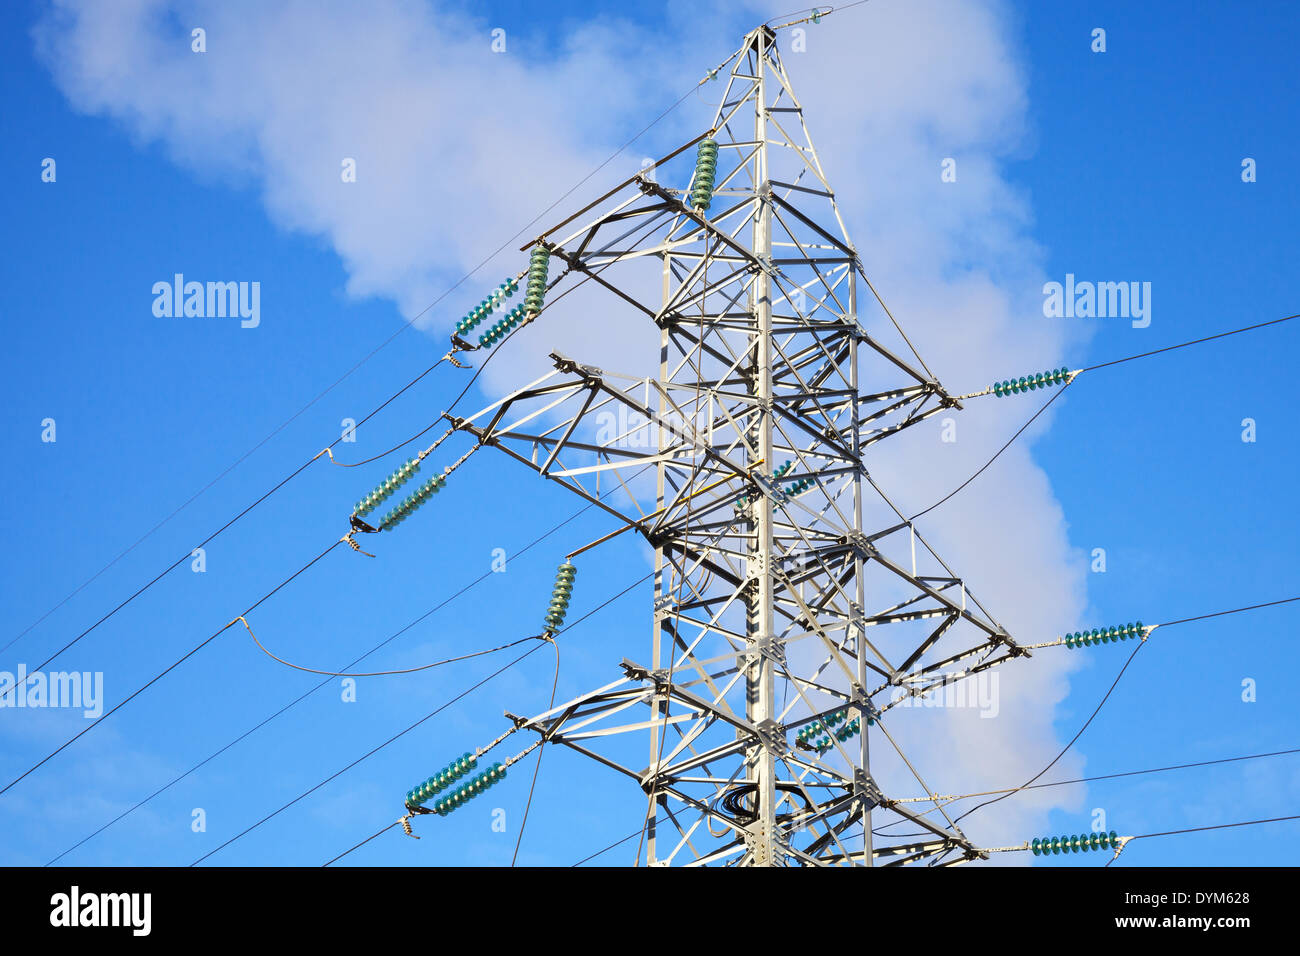 High voltage power lines and steel pylon above the sky Stock Photo